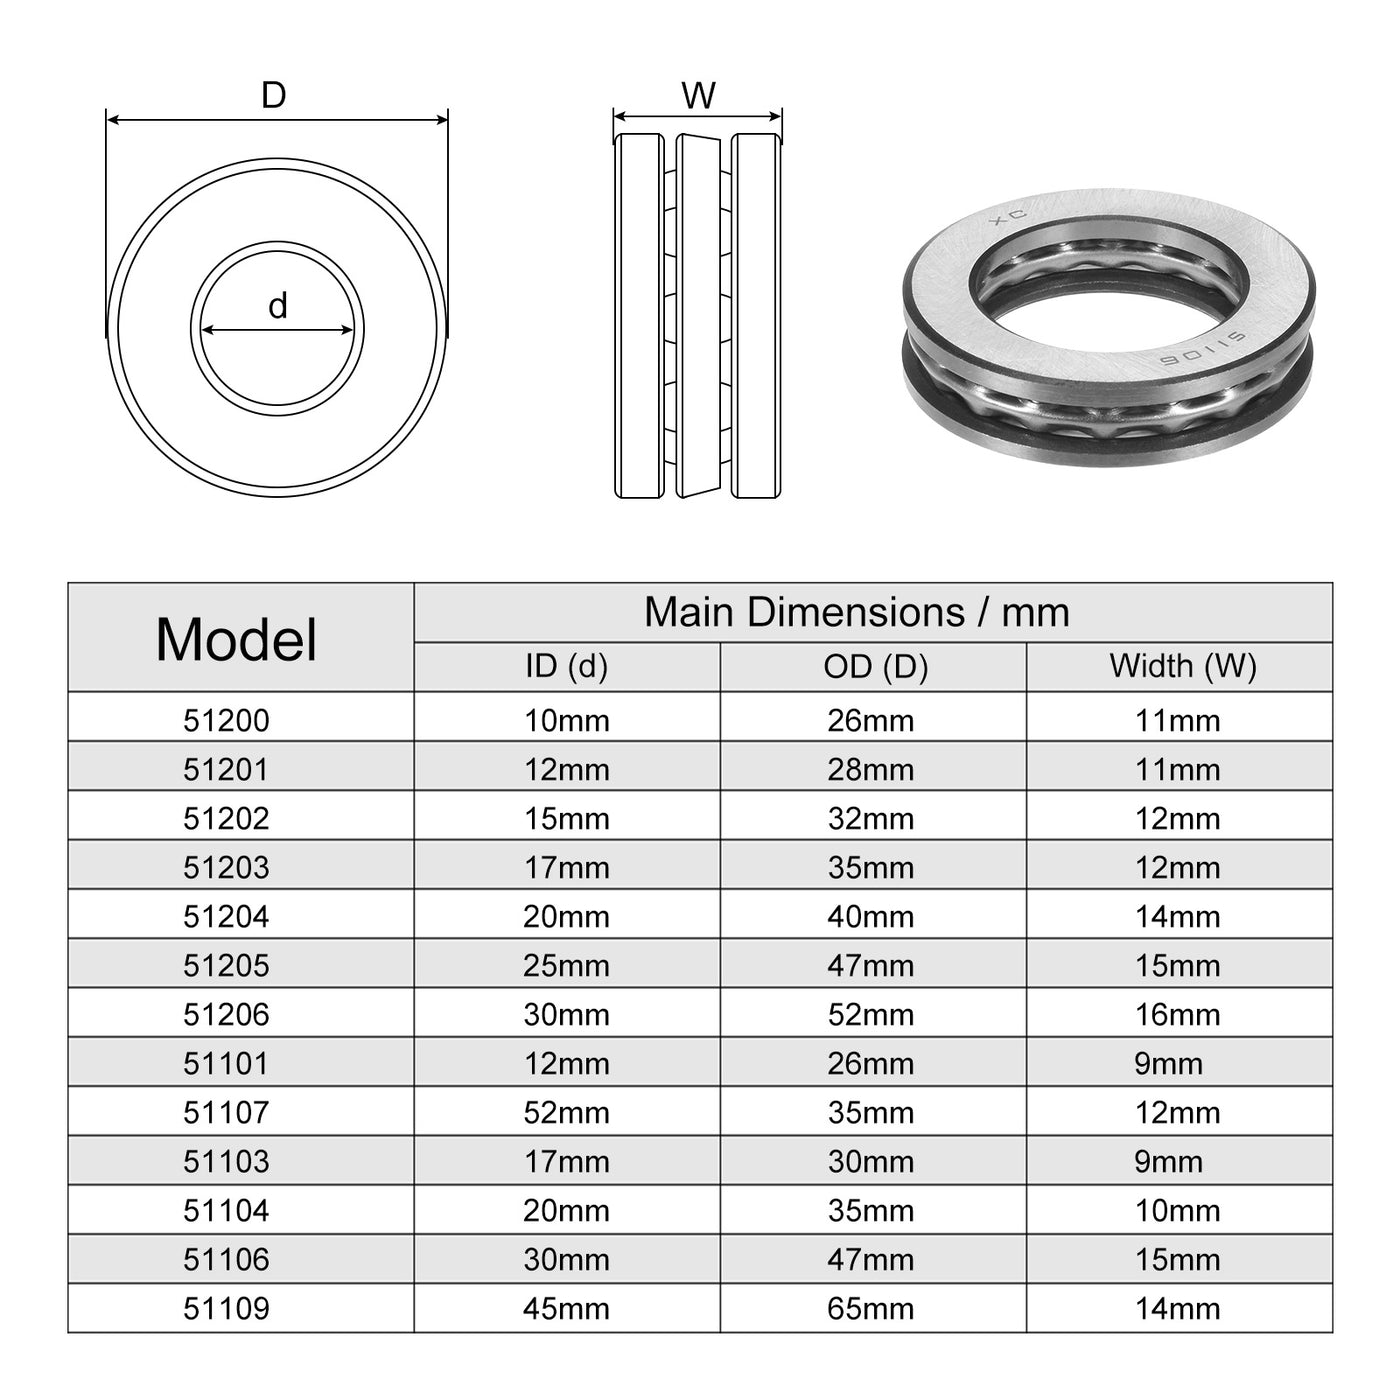 uxcell Uxcell 51106 Thrust Ball Bearing 30x47x11mm High Carbon Steel with Washers 2pcs